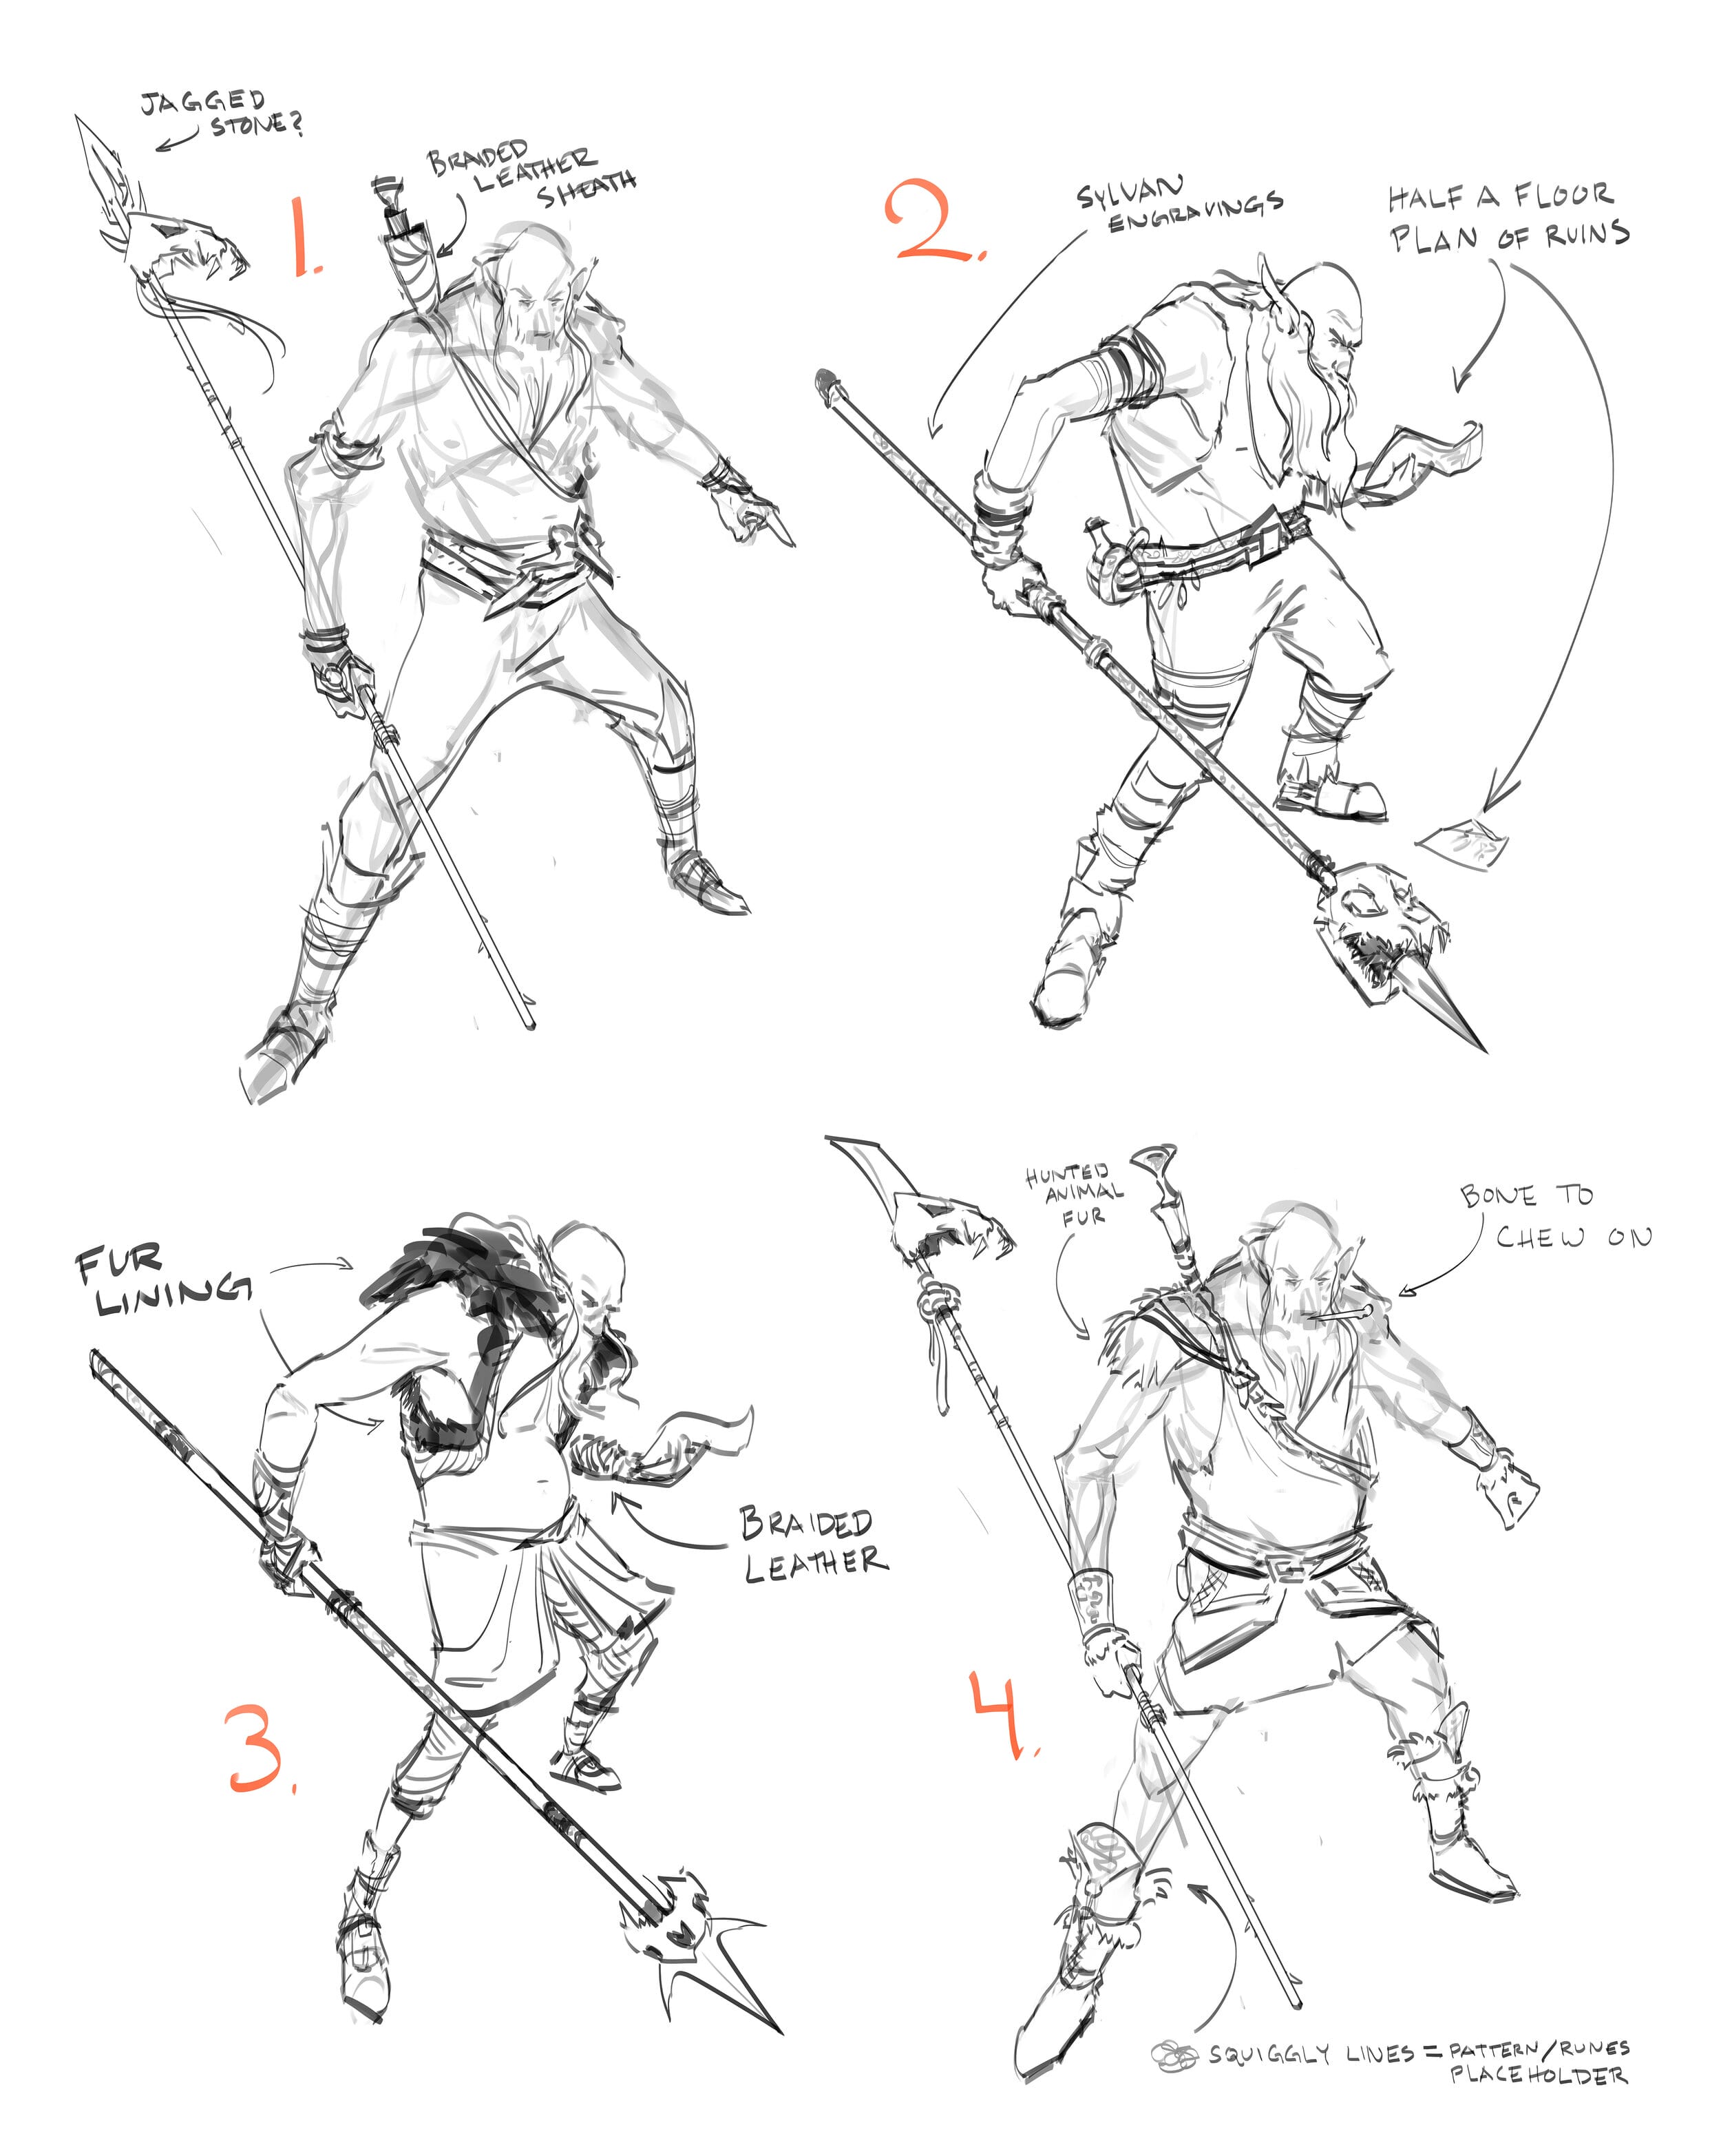 sketches of poses for brocc